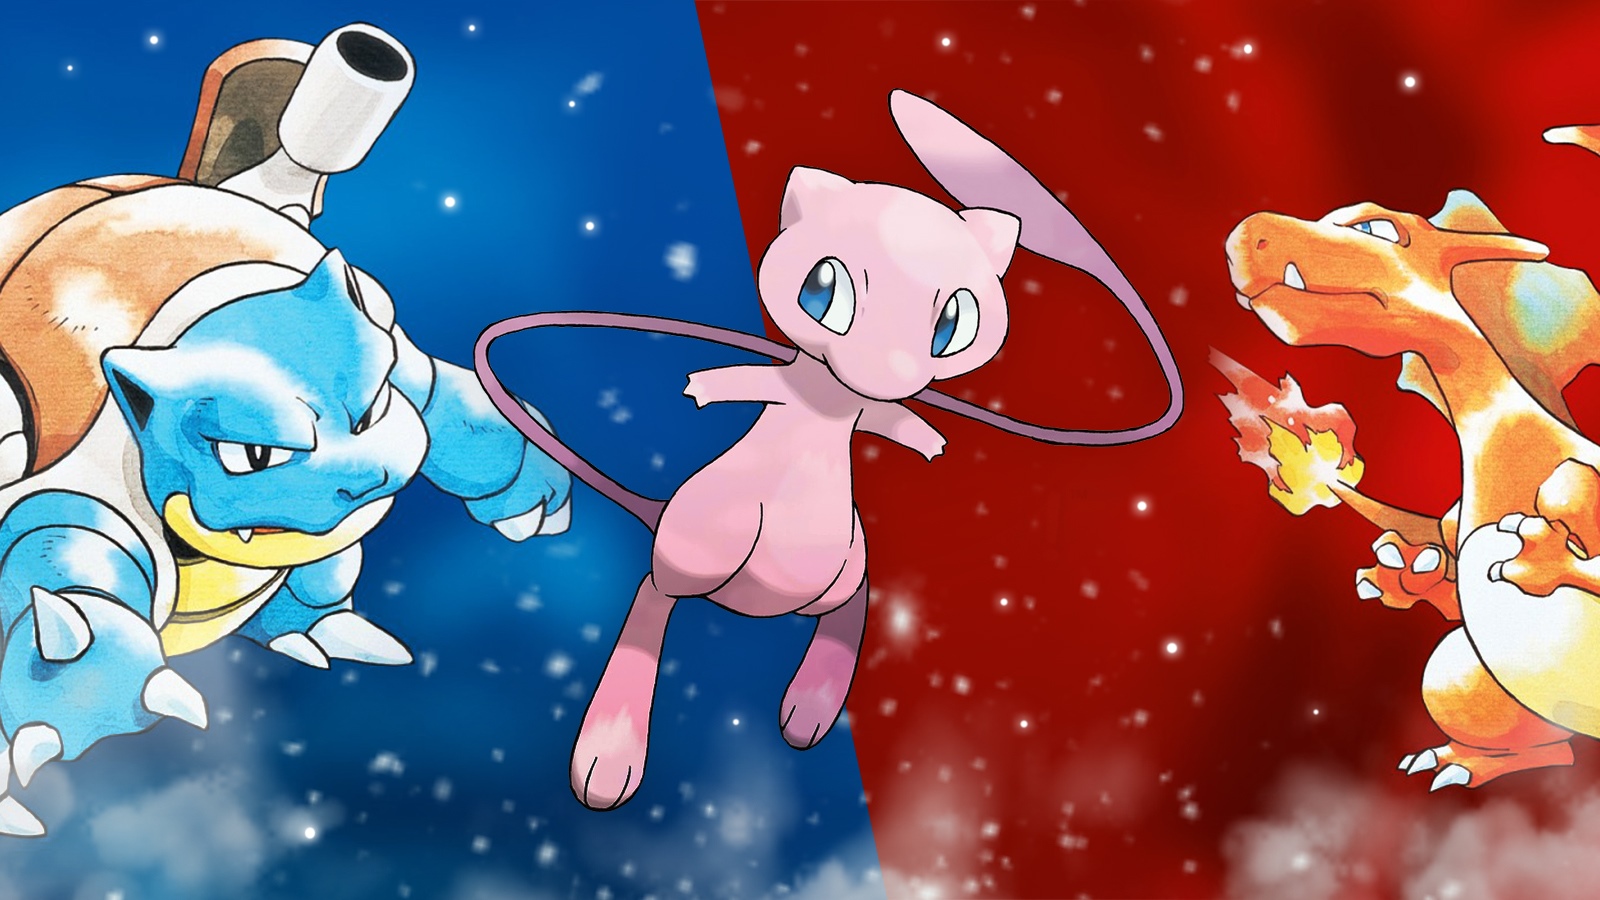 Catching Mew In Pokémon Red And Blue